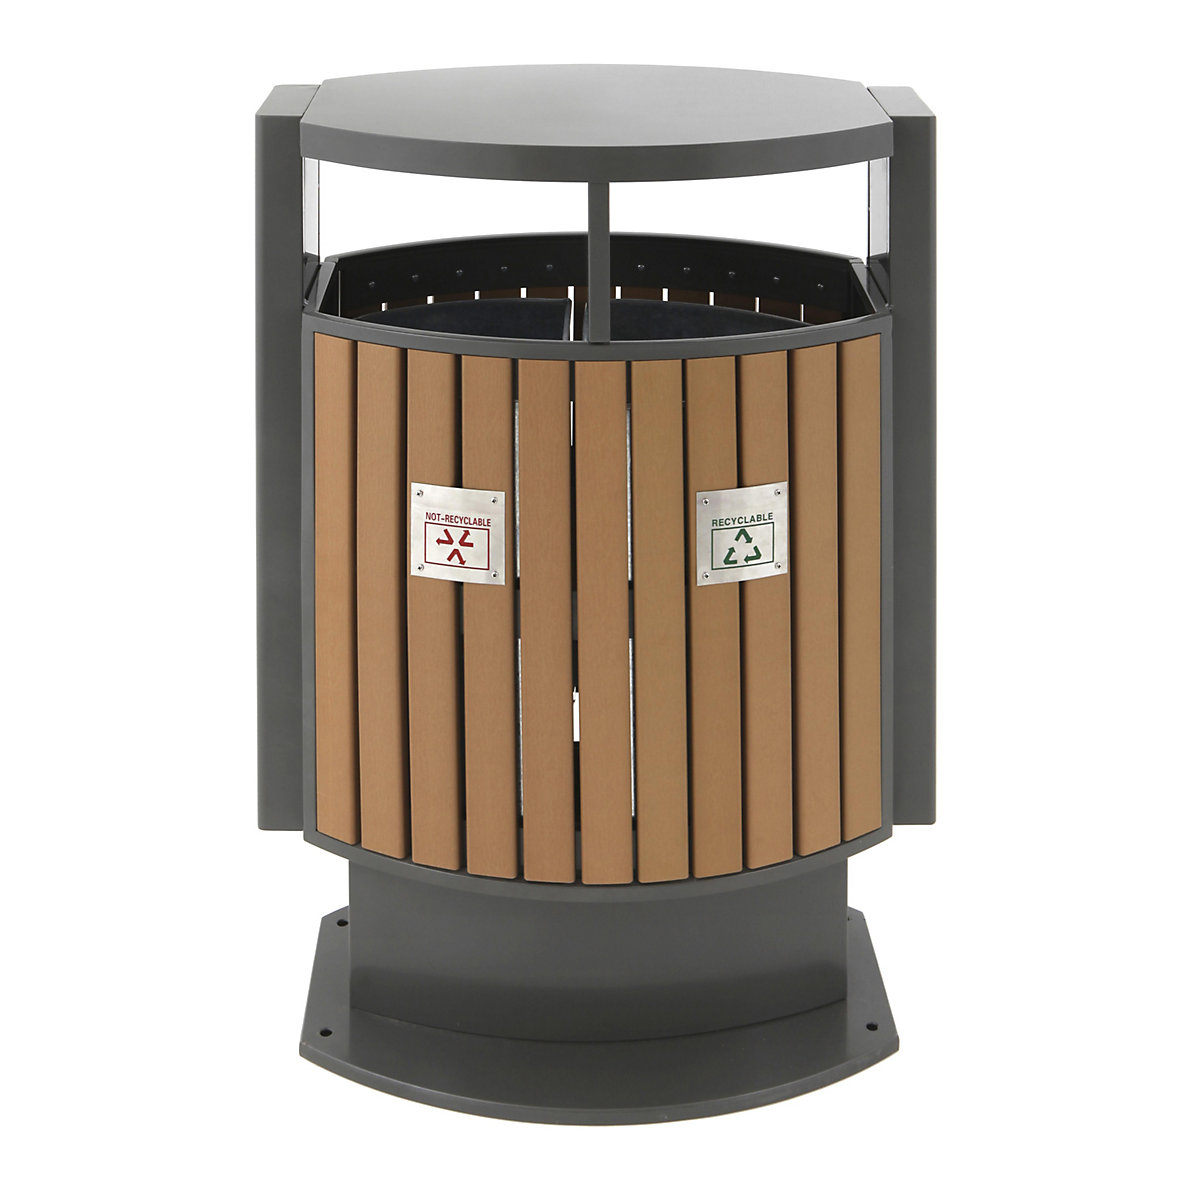 Waste collector for outdoor use